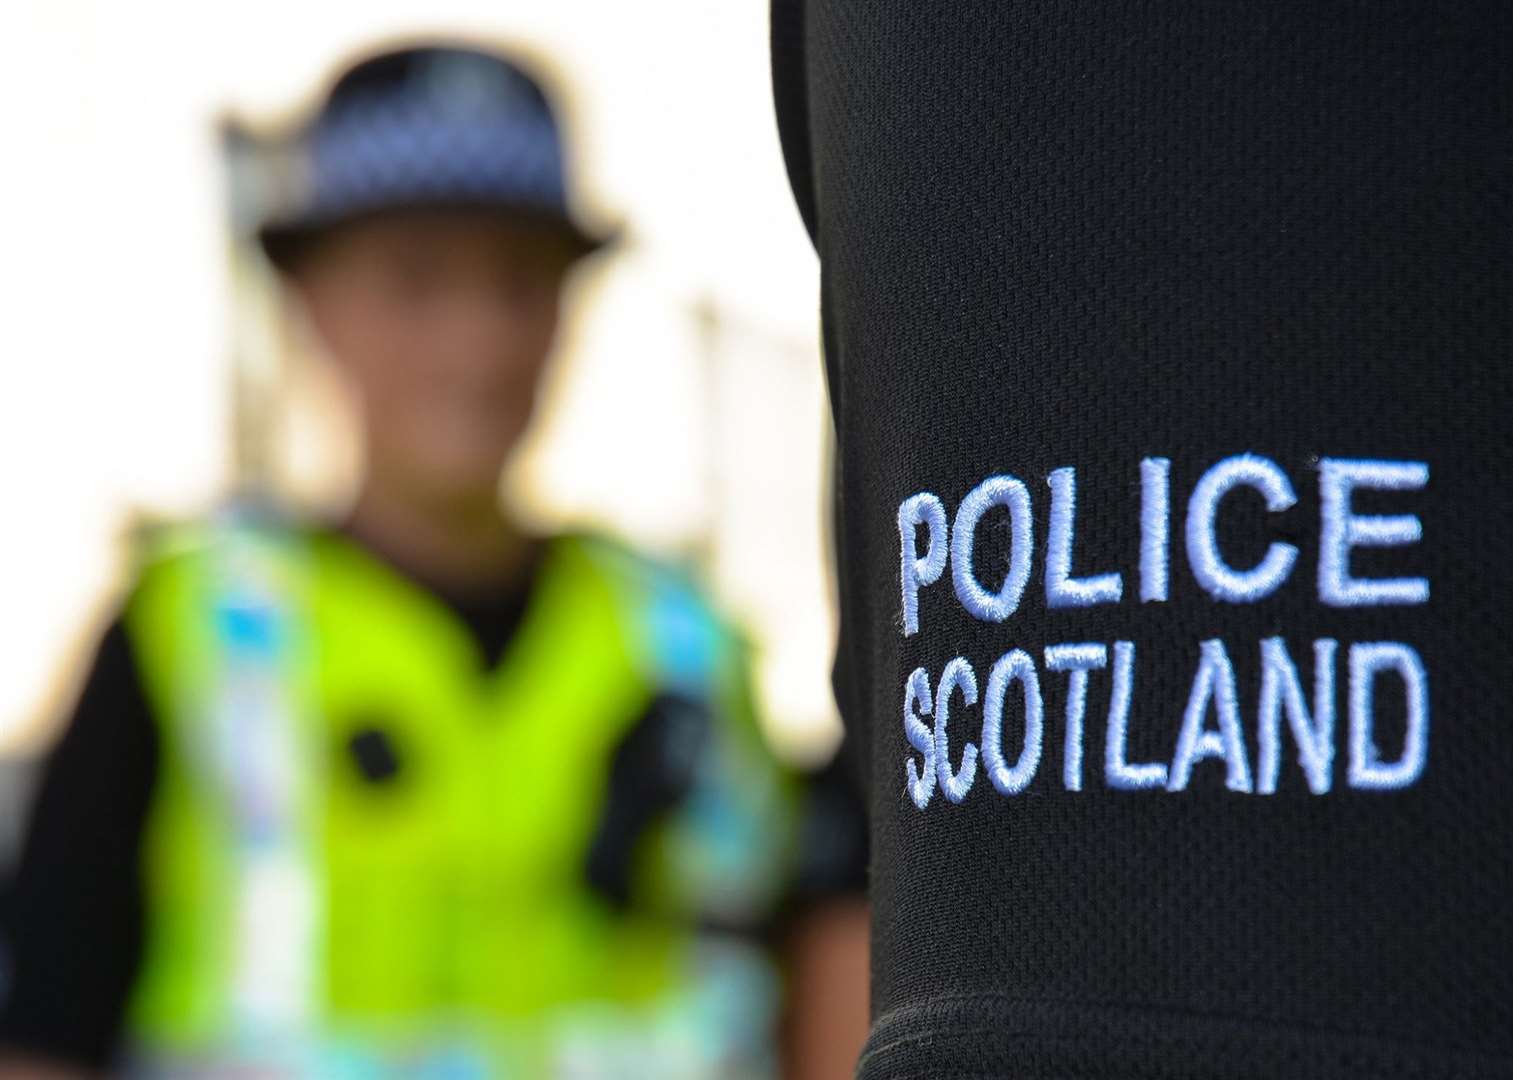 Police Scotland has launched a new campaign.